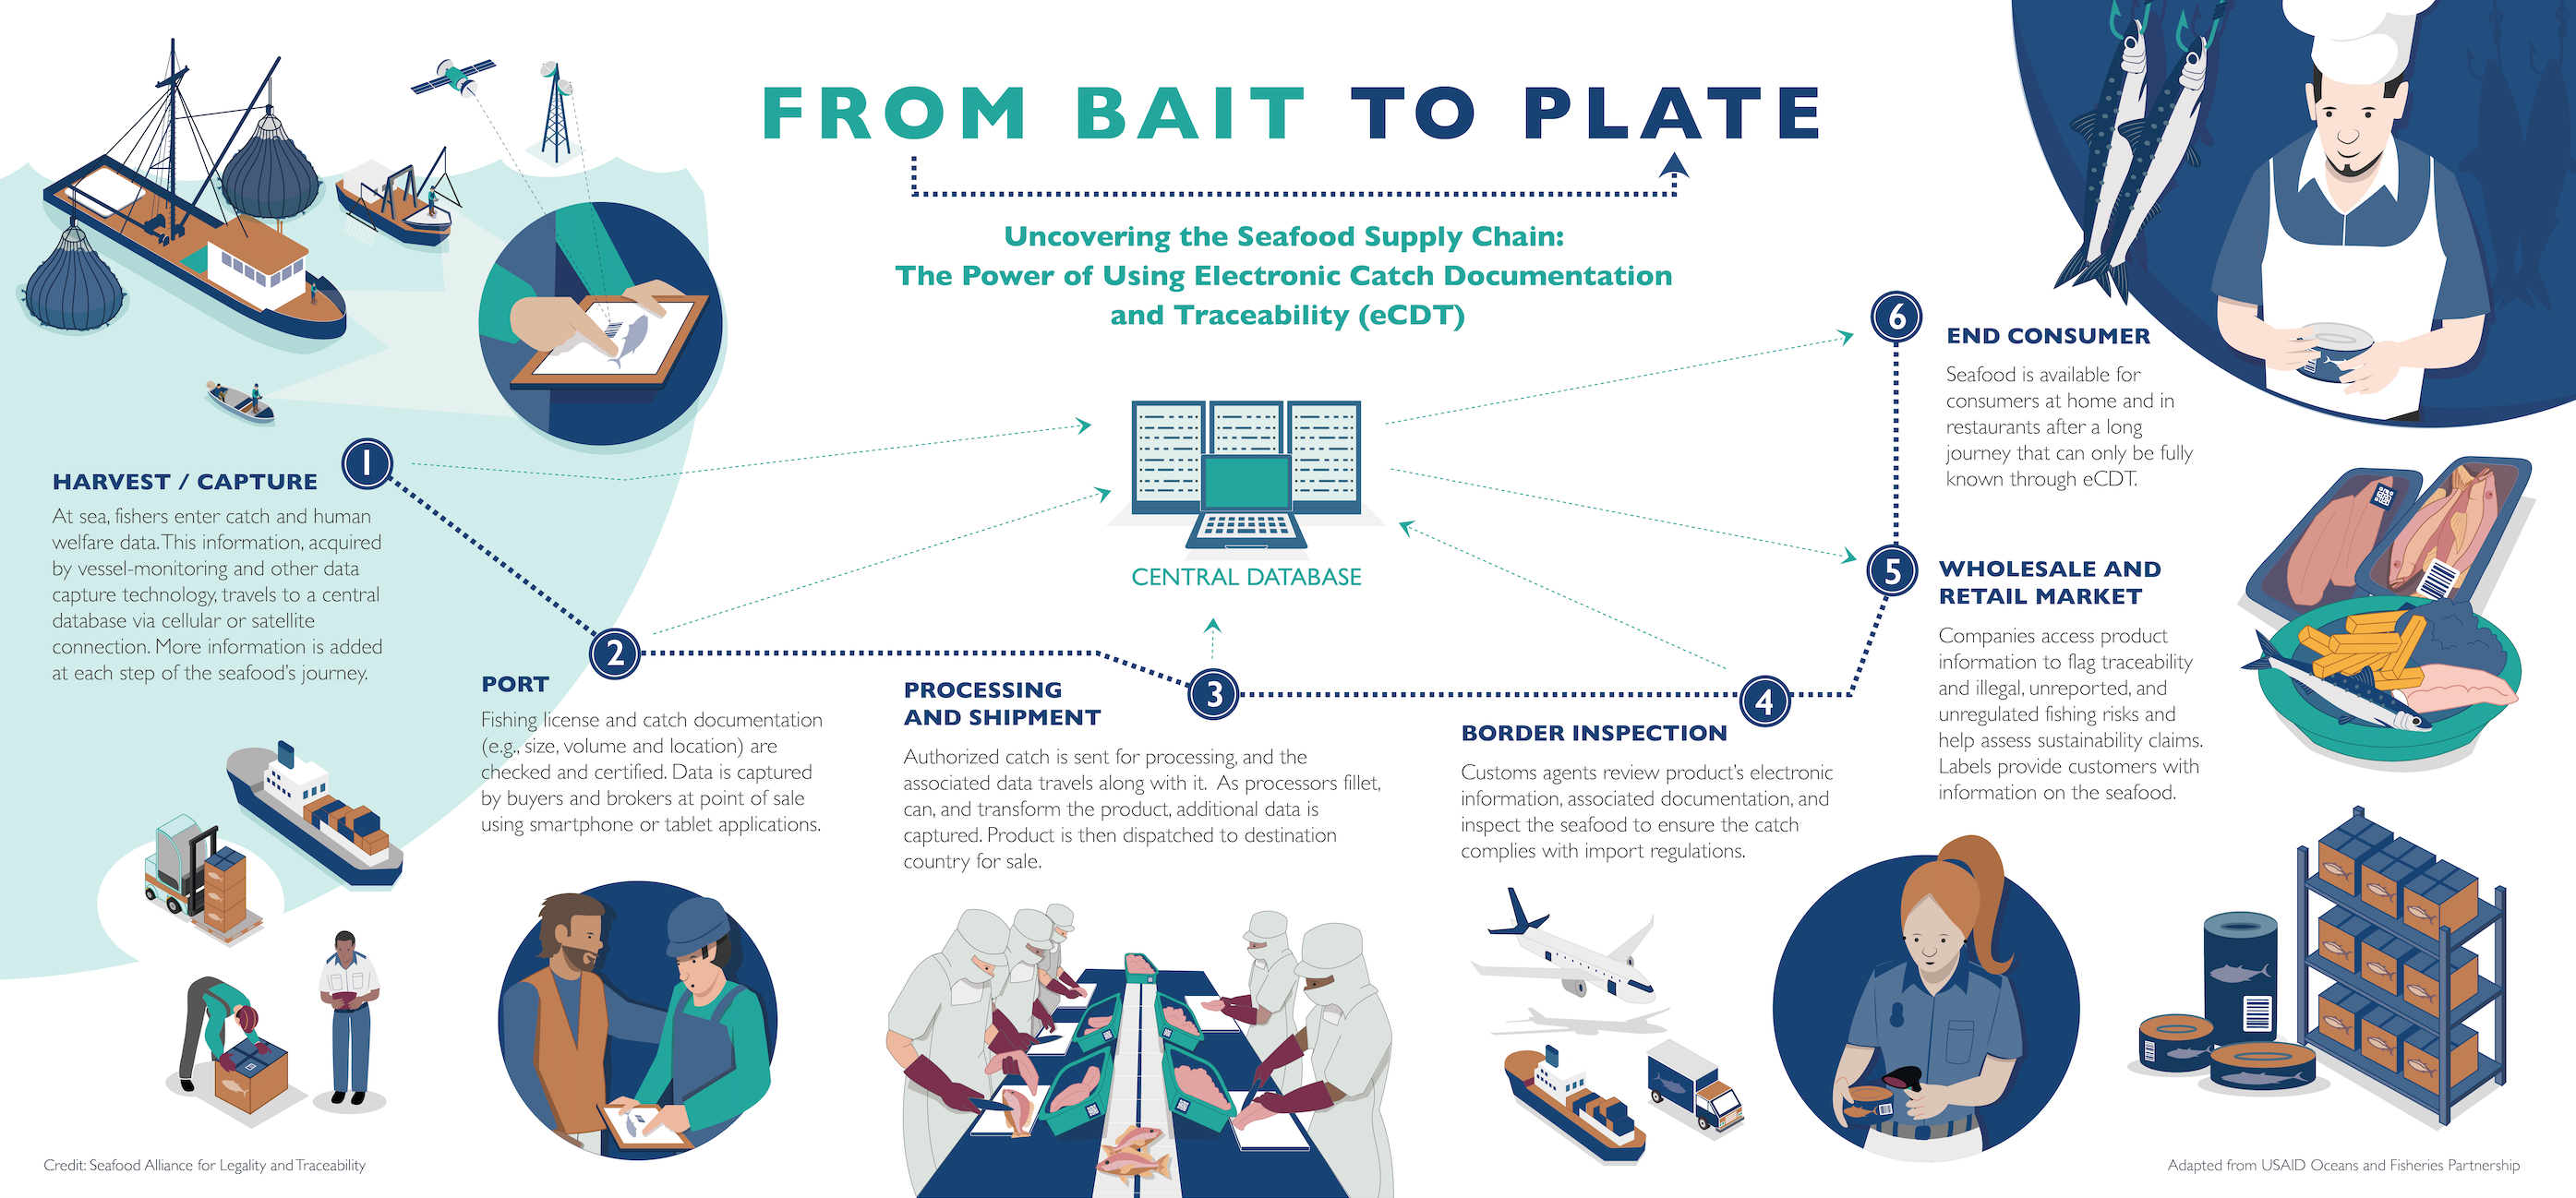 infographic showing the seafood supply chain from harvest/capture to end consumer. With the use of eCDT systems, data is captured via a central database in each step of the product's journey and accessible for verification of legality.